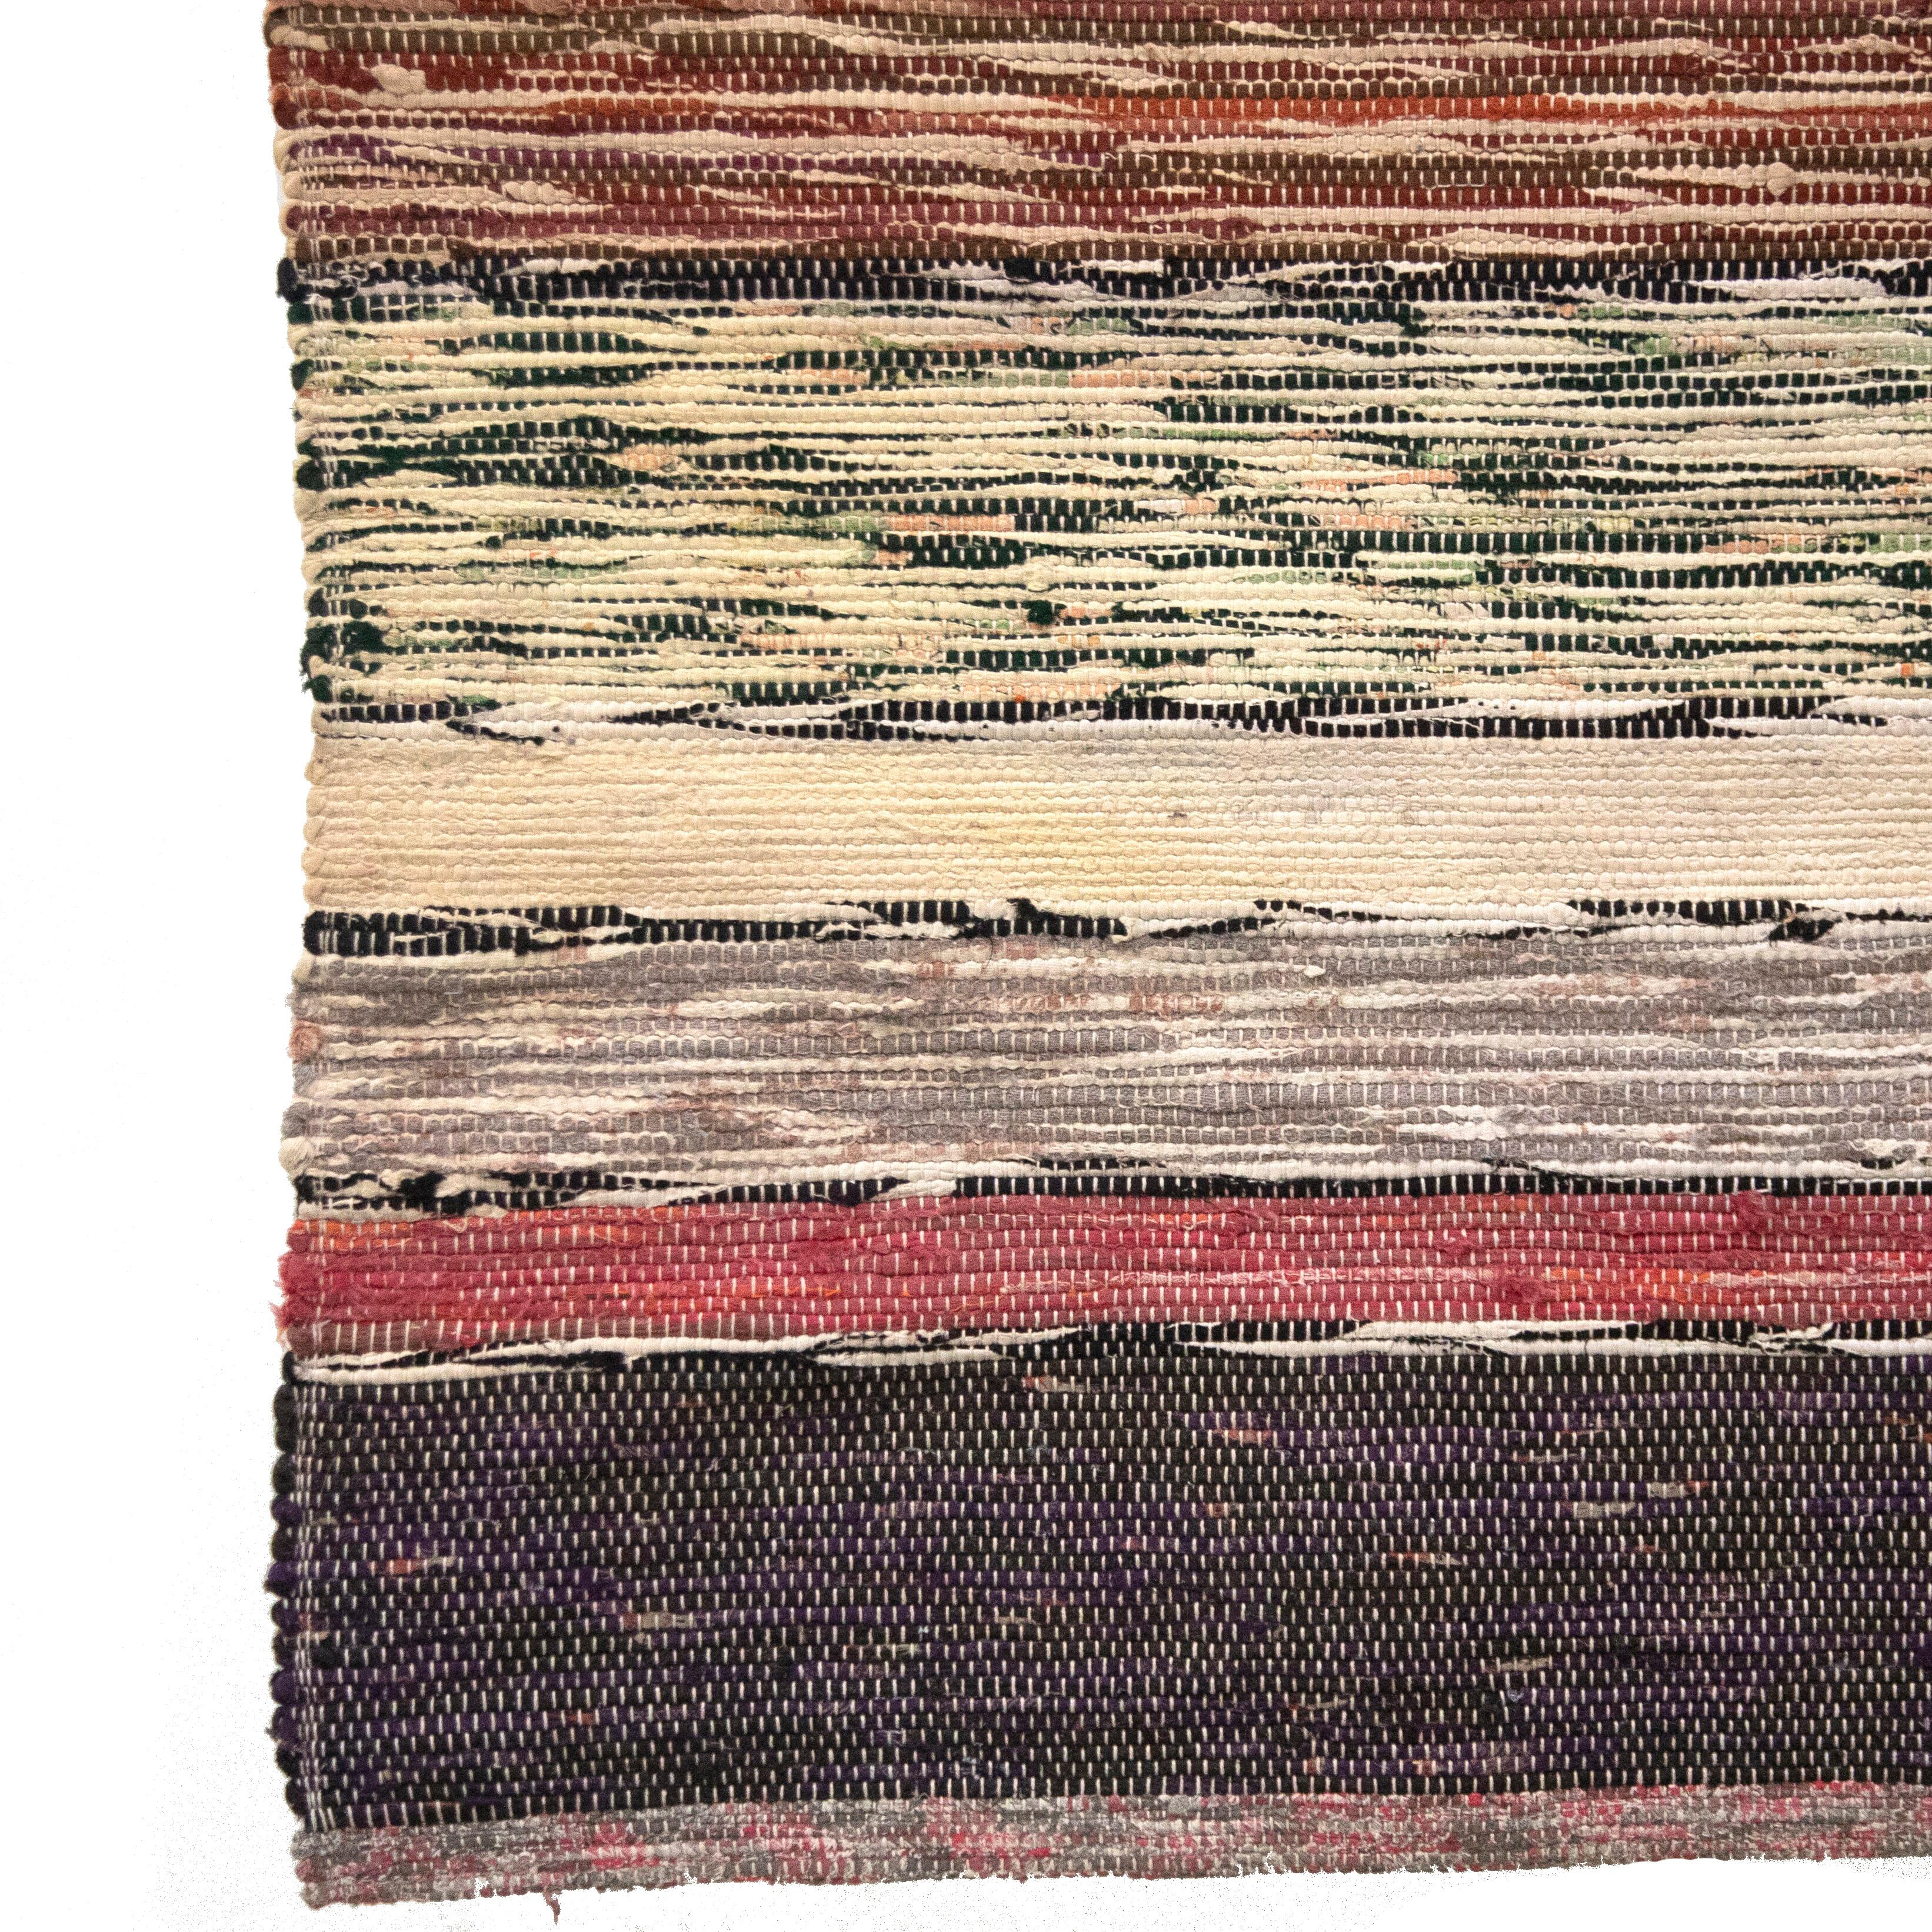 20th Century Swedish rag rug.   Featuring an attractive striped design in tones of black, blue, and red.   This rug is machine washable at 30 degrees.
RT6024475